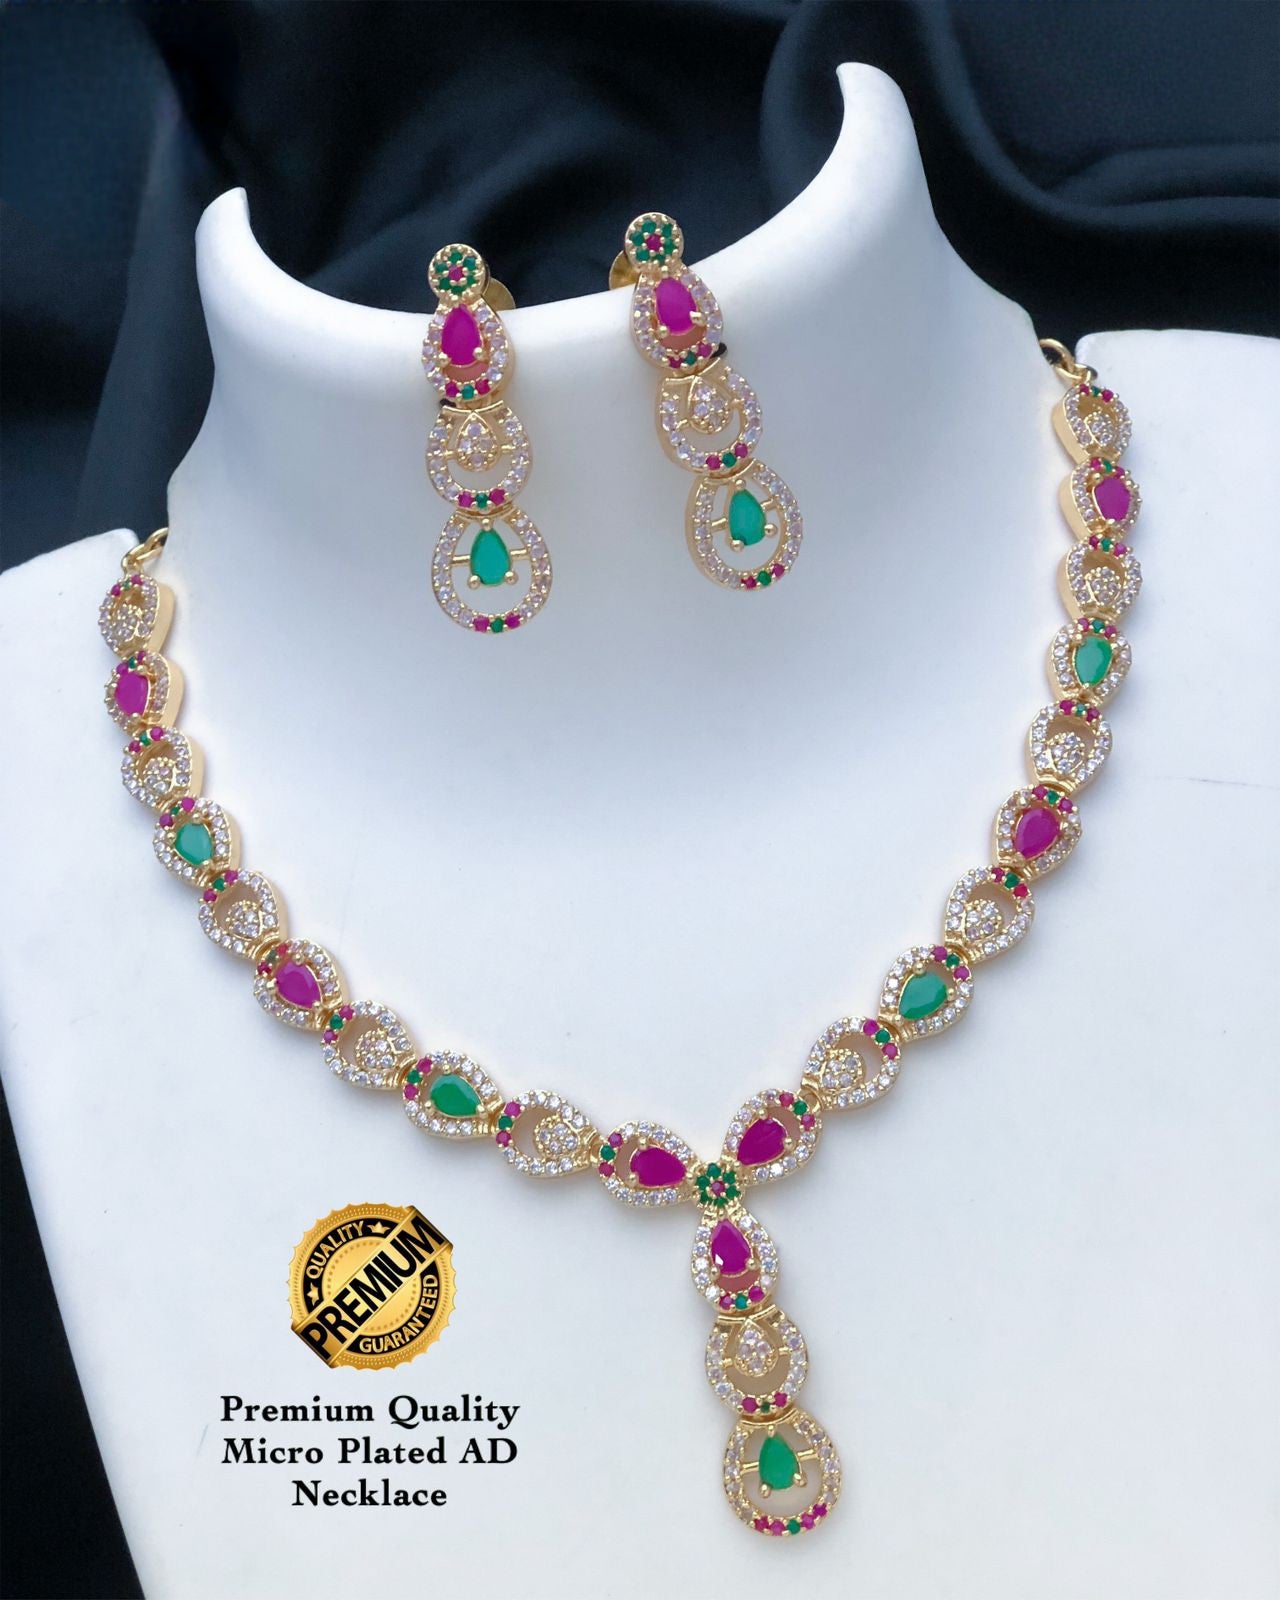 Cute Designer American Diamond Ruby Emerald Necklace earring set|One Gram gold Unique design CZ AD necklace Indian jewelry| Gift for her